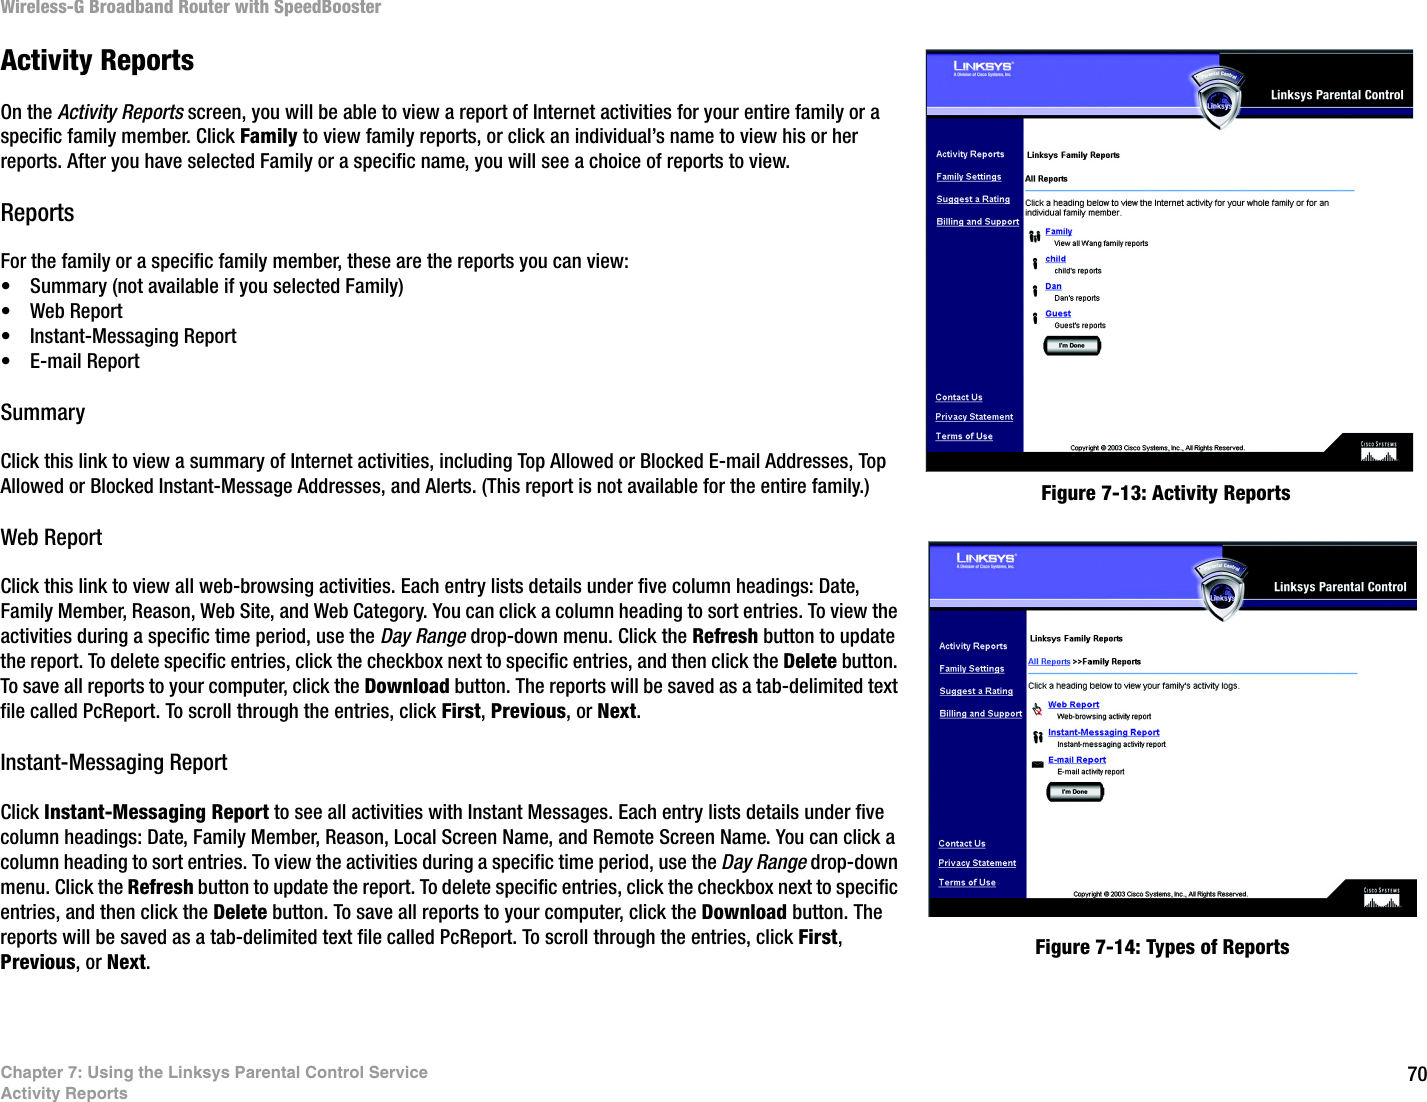 70Chapter 7: Using the Linksys Parental Control ServiceActivity ReportsWireless-G Broadband Router with SpeedBoosterActivity ReportsOn the Activity Reports screen, you will be able to view a report of Internet activities for your entire family or a specific family member. Click Family to view family reports, or click an individual’s name to view his or her reports. After you have selected Family or a specific name, you will see a choice of reports to view.ReportsFor the family or a specific family member, these are the reports you can view:• Summary (not available if you selected Family)• Web Report• Instant-Messaging Report• E-mail ReportSummaryClick this link to view a summary of Internet activities, including Top Allowed or Blocked E-mail Addresses, Top Allowed or Blocked Instant-Message Addresses, and Alerts. (This report is not available for the entire family.)Web ReportClick this link to view all web-browsing activities. Each entry lists details under five column headings: Date, Family Member, Reason, Web Site, and Web Category. You can click a column heading to sort entries. To view the activities during a specific time period, use the Day Range drop-down menu. Click the Refresh button to update the report. To delete specific entries, click the checkbox next to specific entries, and then click the Delete button. To save all reports to your computer, click the Download button. The reports will be saved as a tab-delimited text file called PcReport. To scroll through the entries, click First, Previous, or Next.Instant-Messaging ReportClick Instant-Messaging Report to see all activities with Instant Messages. Each entry lists details under five column headings: Date, Family Member, Reason, Local Screen Name, and Remote Screen Name. You can click a column heading to sort entries. To view the activities during a specific time period, use the Day Range drop-down menu. Click the Refresh button to update the report. To delete specific entries, click the checkbox next to specific entries, and then click the Delete button. To save all reports to your computer, click the Download button. The reports will be saved as a tab-delimited text file called PcReport. To scroll through the entries, click First, Previous, or Next.Figure 7-13: Activity ReportsFigure 7-14: Types of Reports